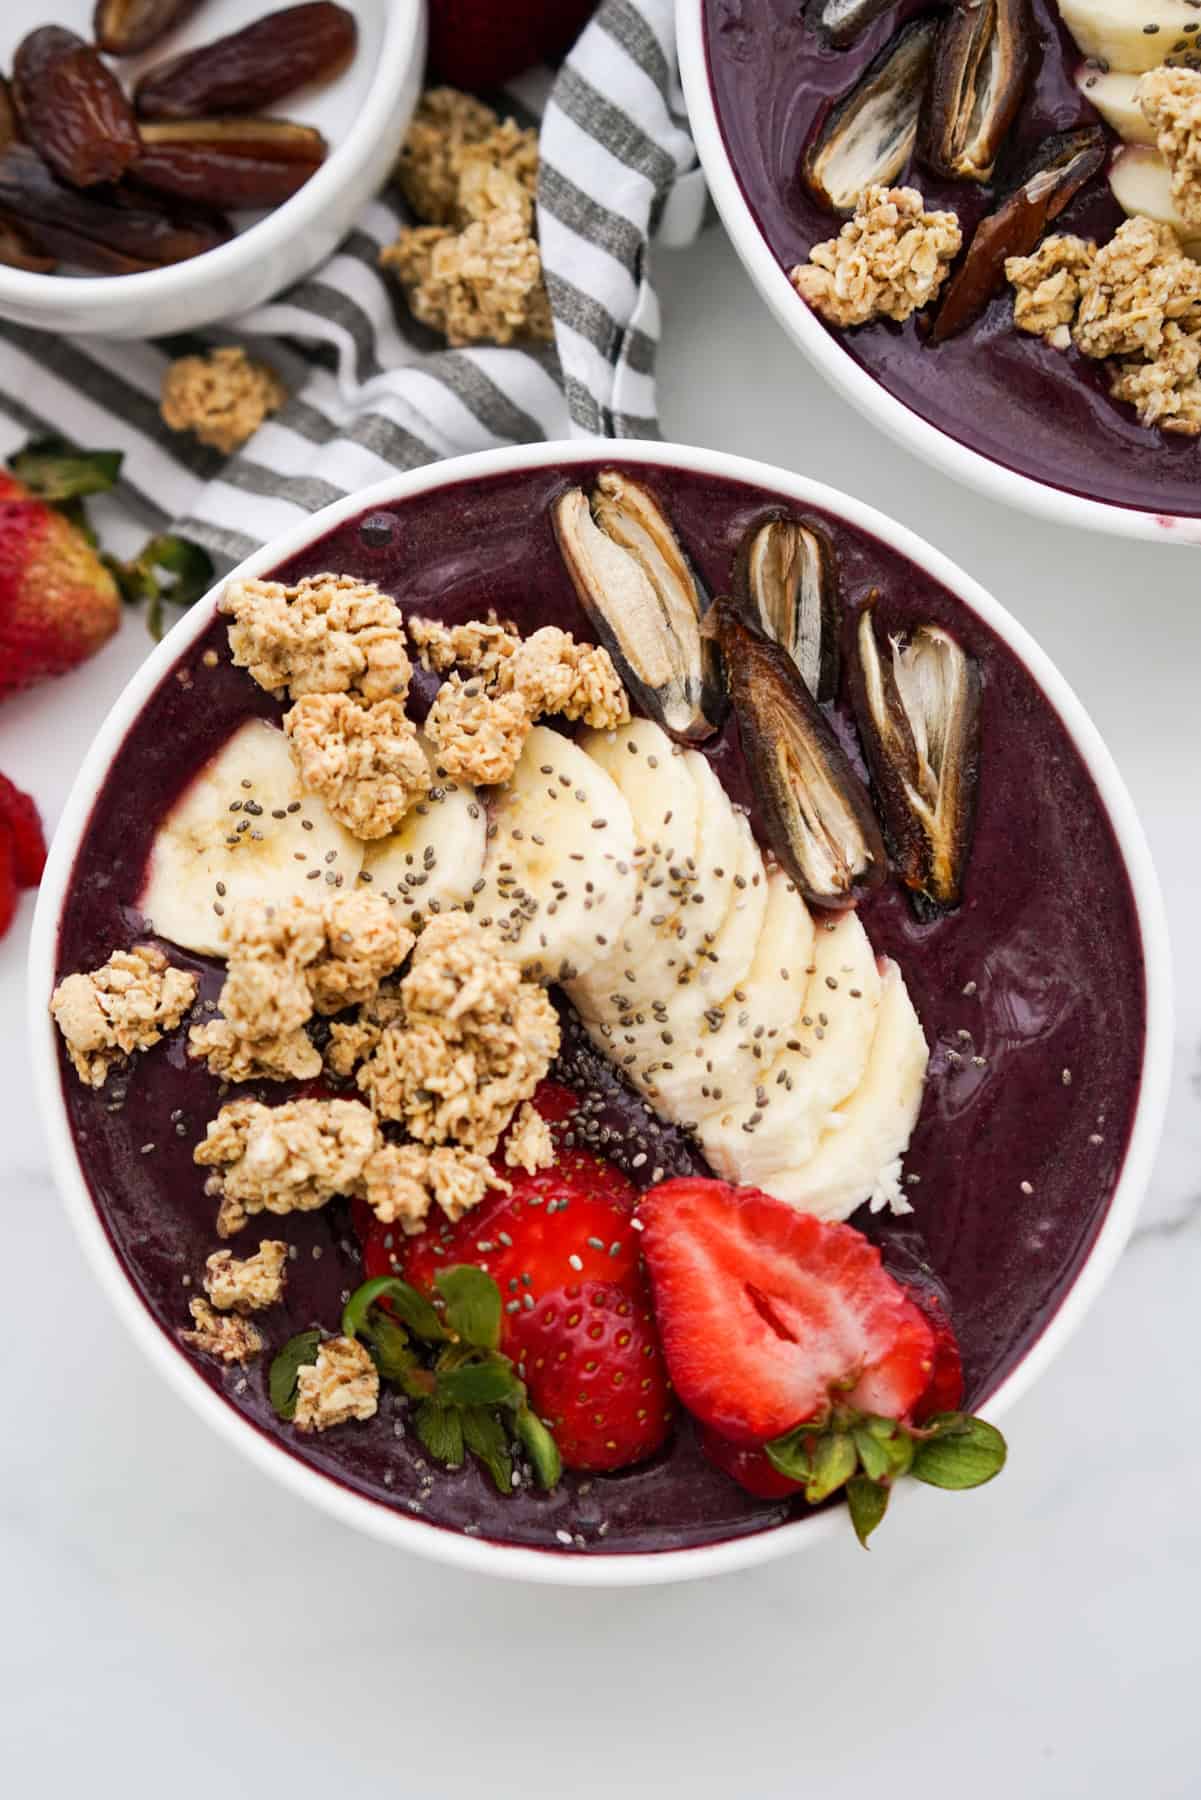 Top down view of Acai Smoothie Bowl topped with strawberries, bananas, dates and granola